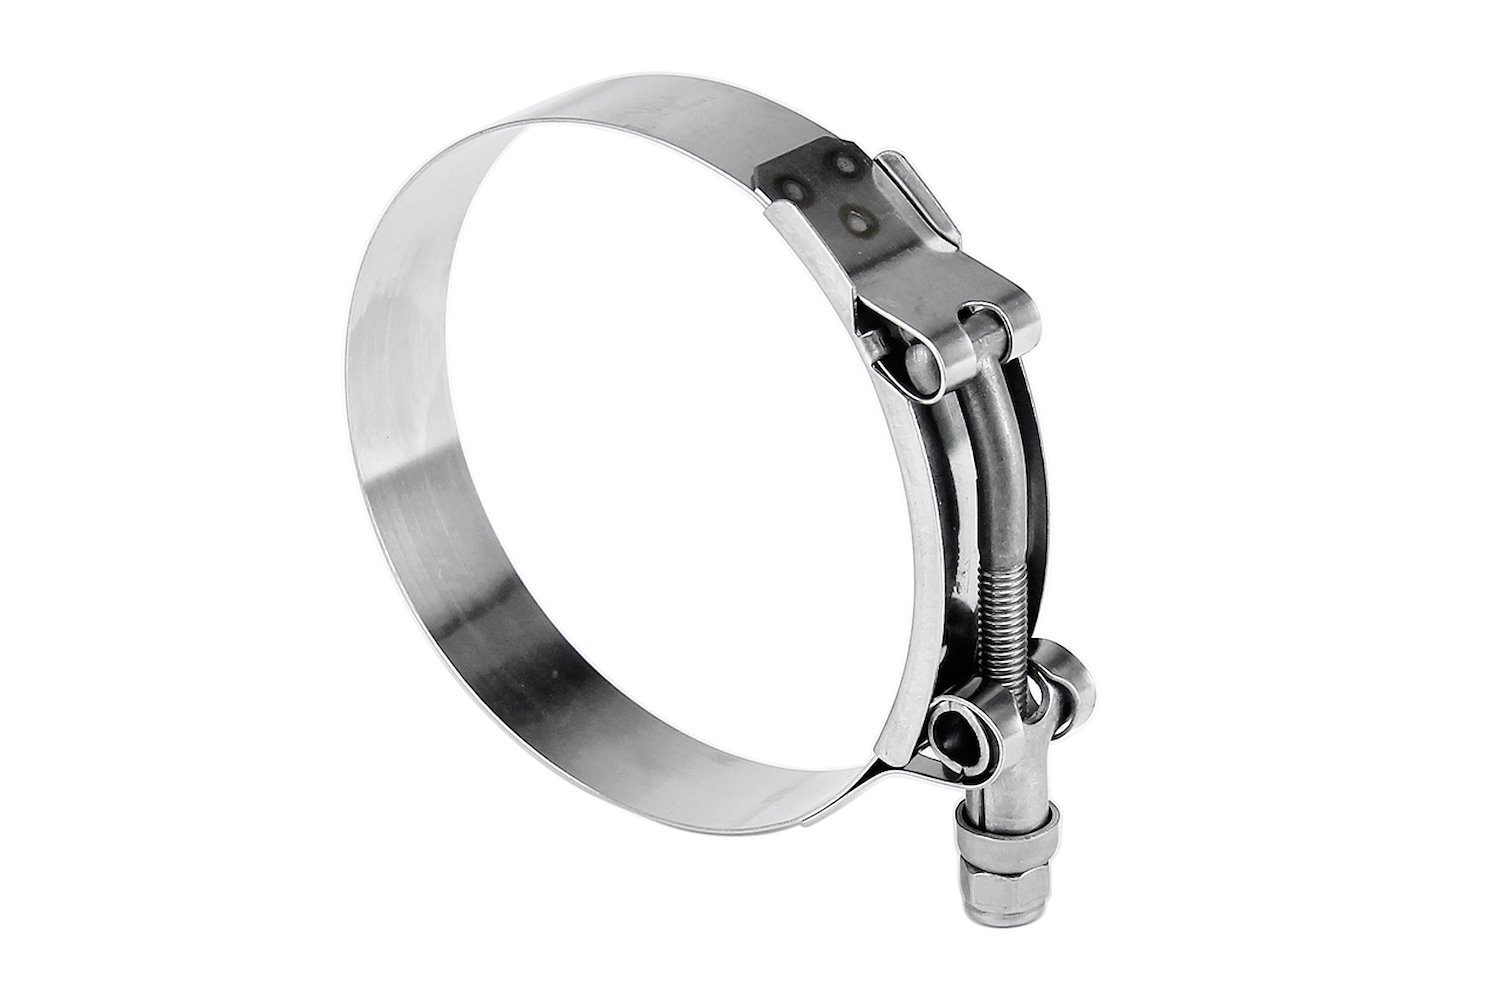 SSTC-133-141 100-Percent Stainless Steel T-Bolt Hose Clamp, Size #140, Effective Range: 5.24 in.-5.55 in.